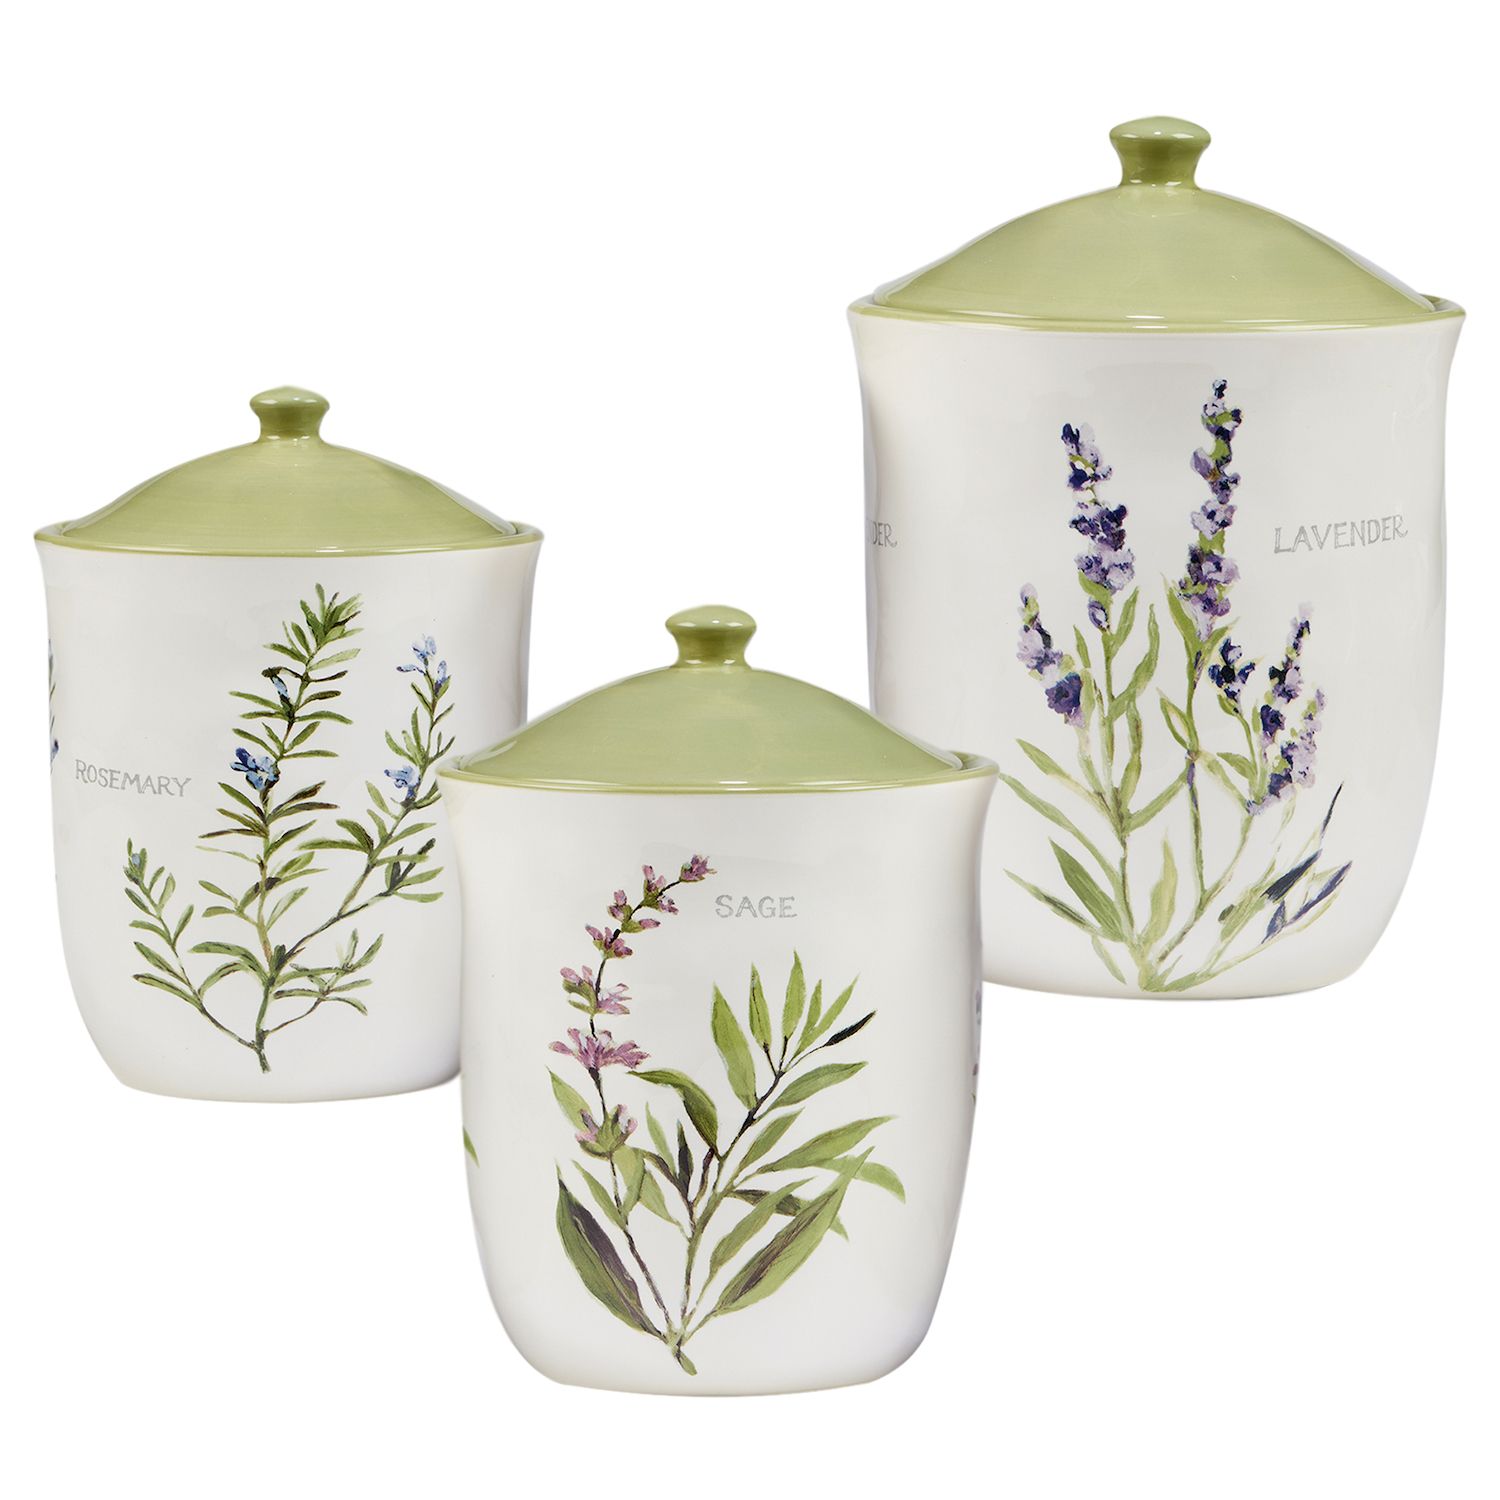 10 Strawberry Street Tide Embossed 3 Piece Ceramic Canister Set, White